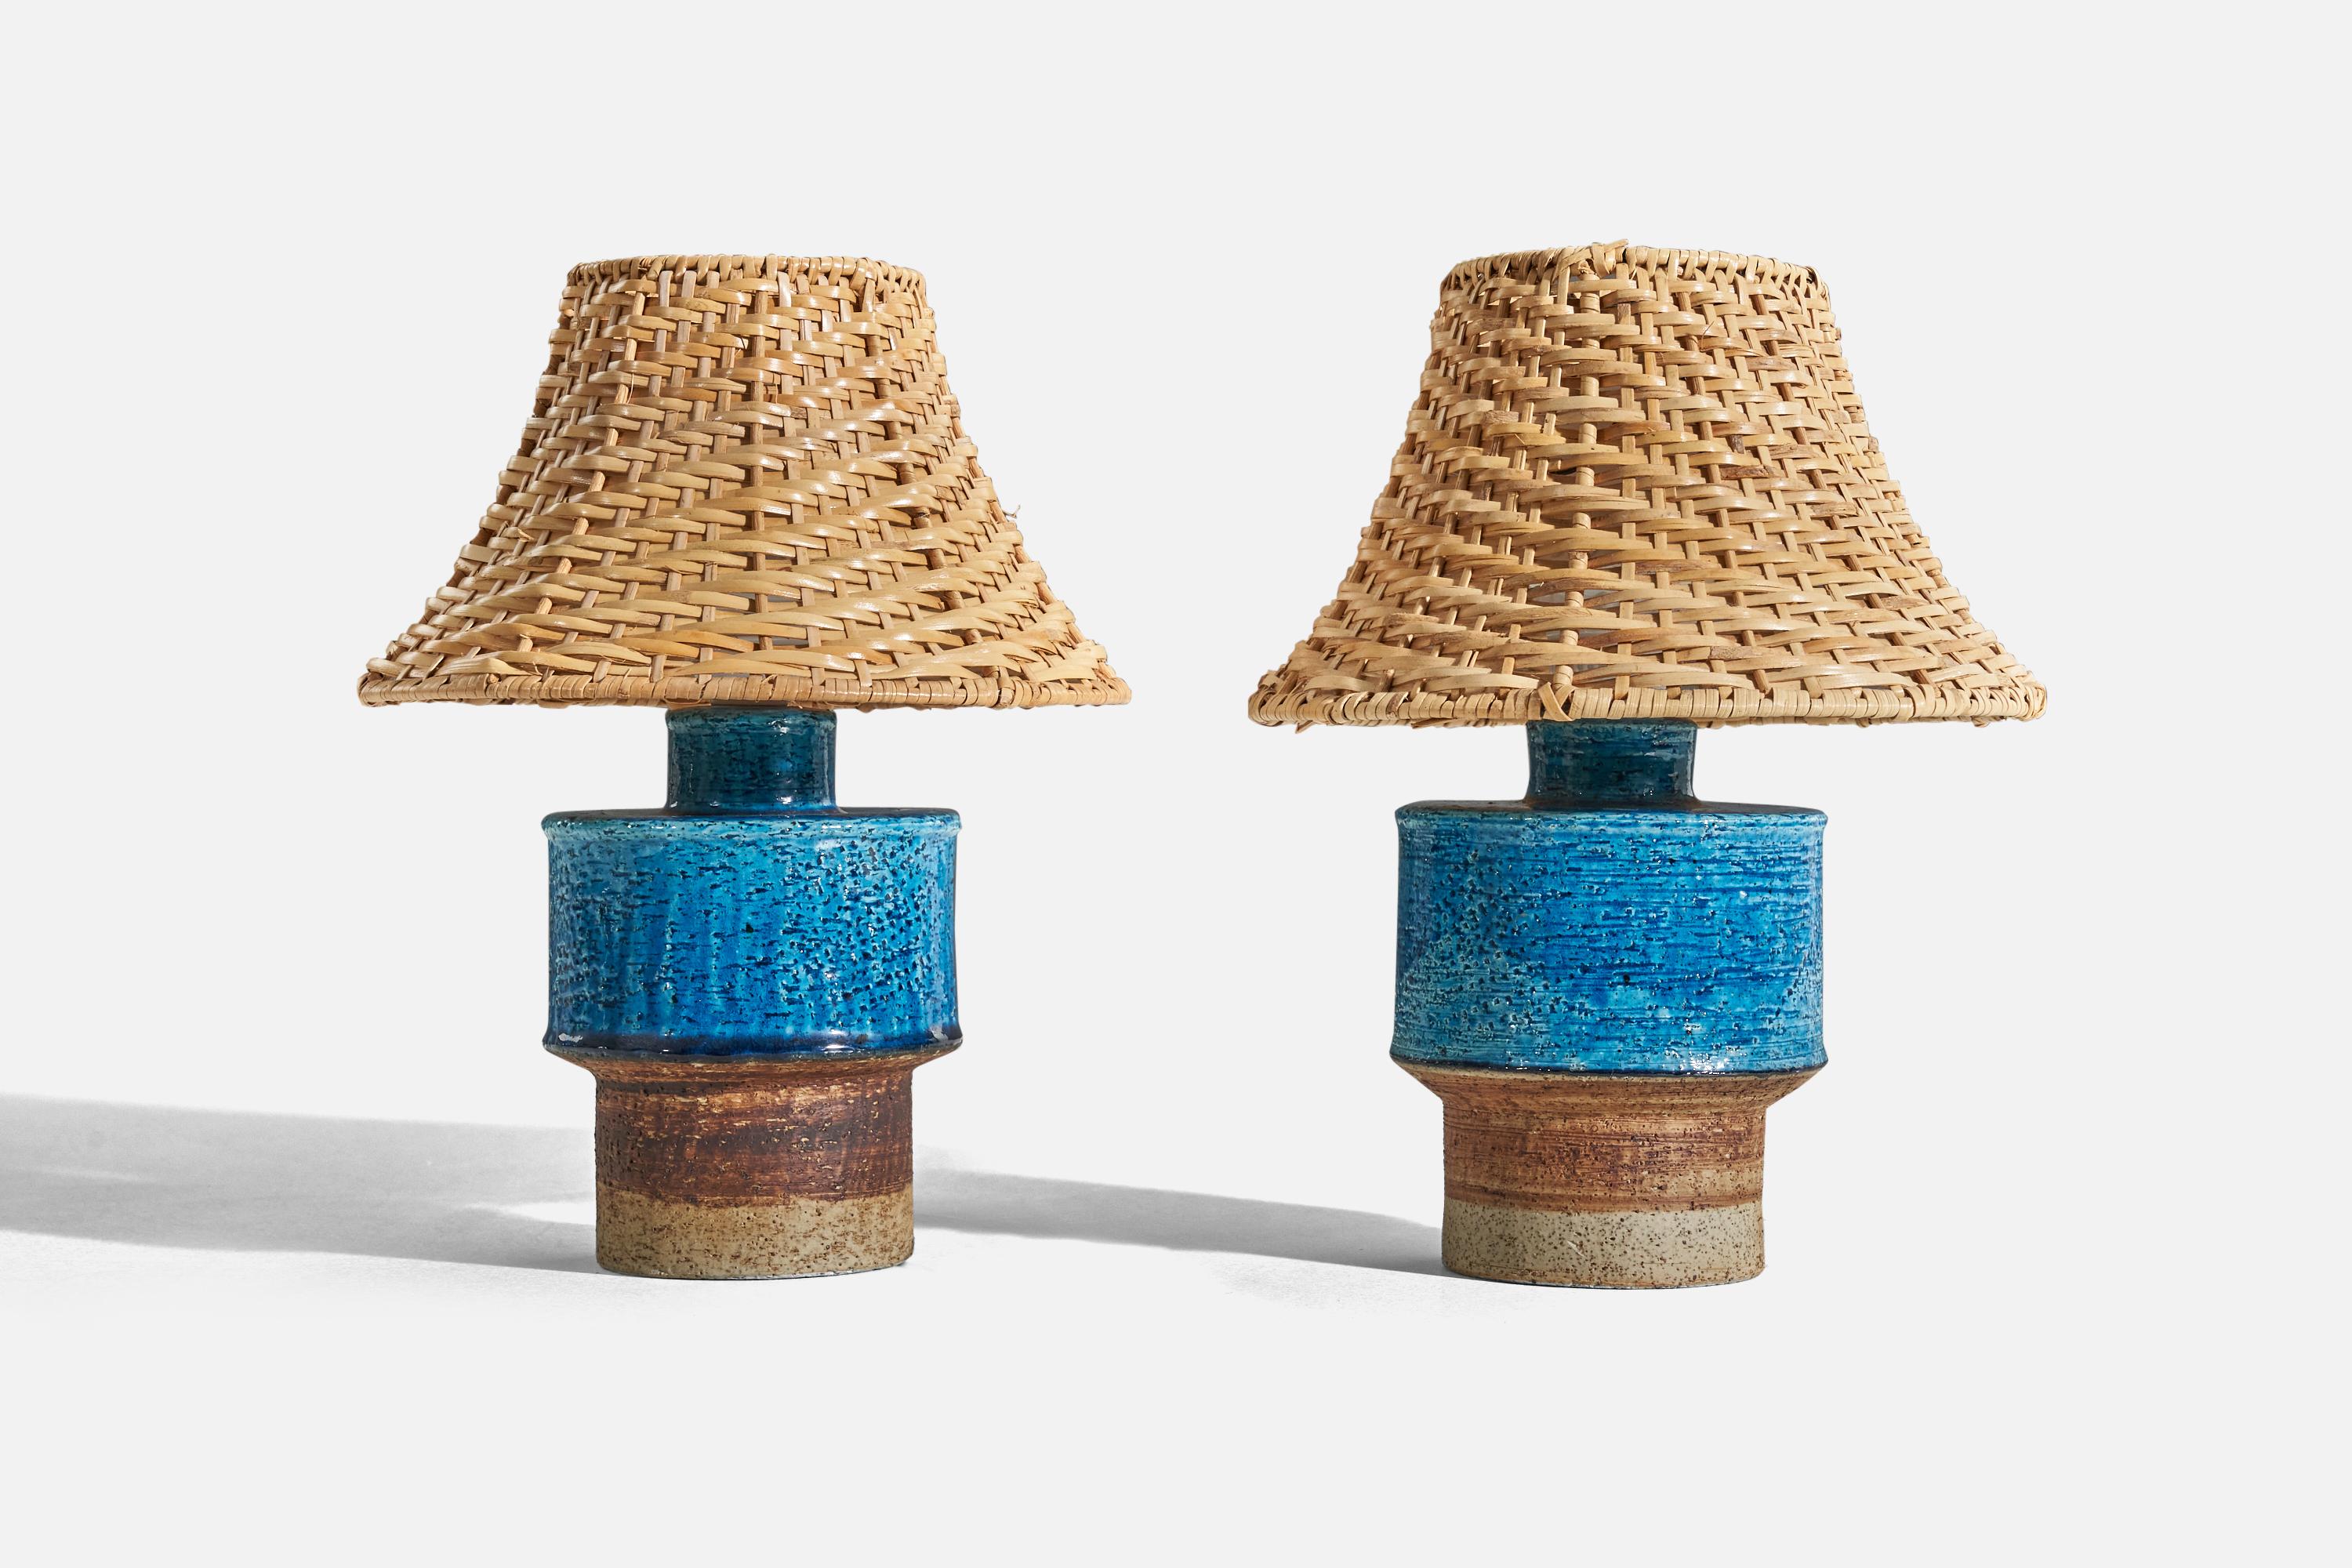 A pair of blue and brown, glazed stoneware table lamp designed by Inger Persson and produced by Rörstrand, Sweden, c. 1960s.

Sold without lampshade. 
Dimensions of Lamp (inches) : 8.4375 x 5 x 5 (H x W x D)
Dimensions of Shade (inches) : 4 x